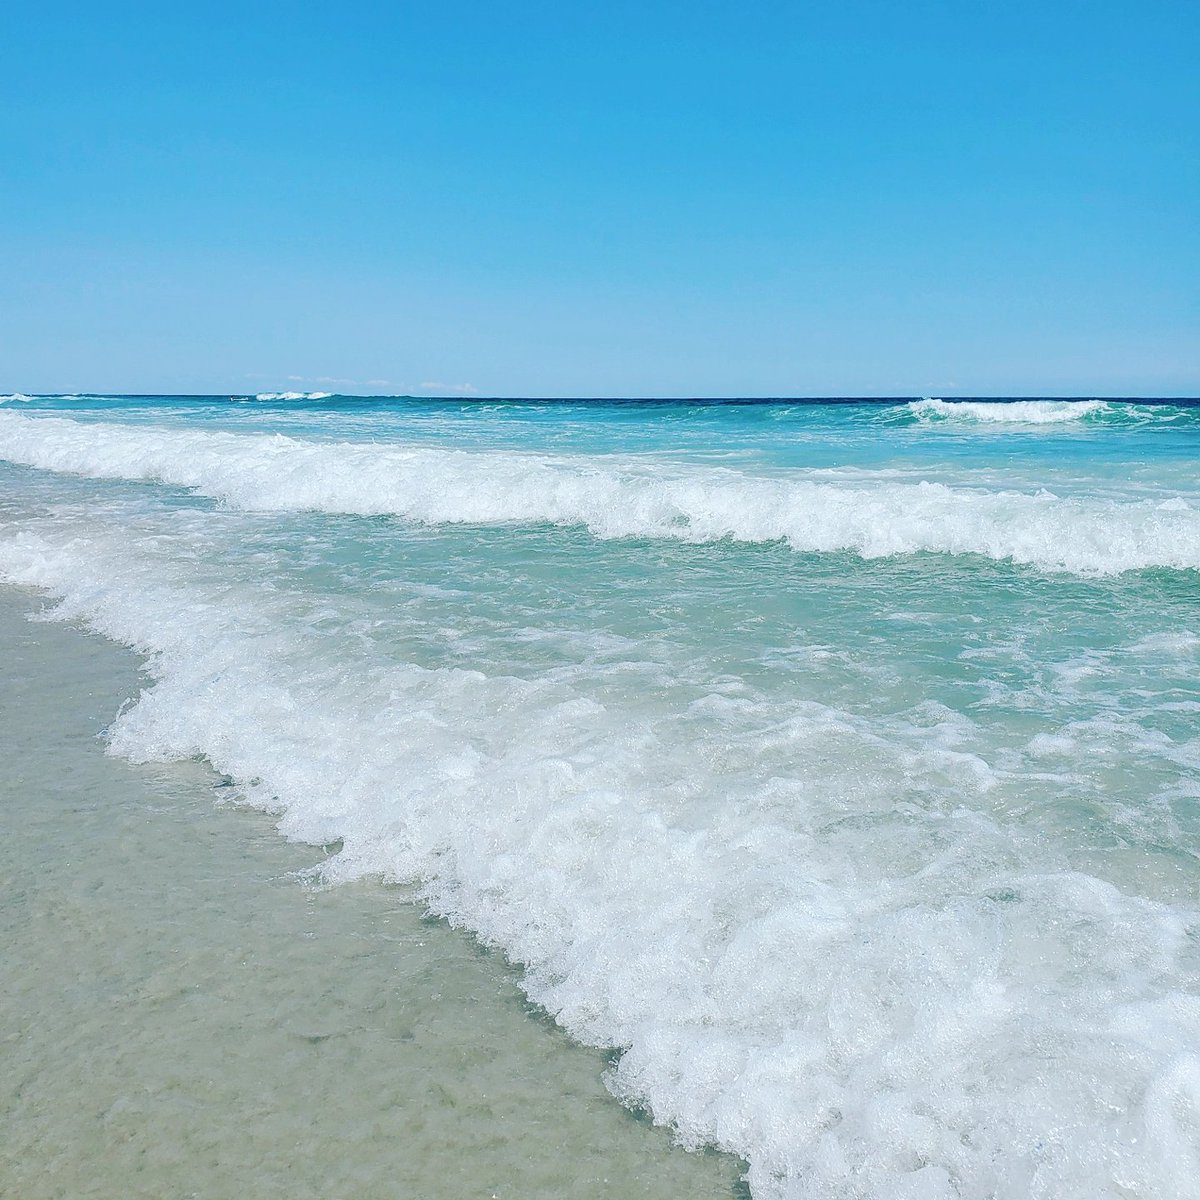 #summer ain't over here down in #northcarolina #beach . Stunning scenery right here ⛱😍🌊 been filming some #scary scenes for our new docu coming out in October and nice to be in this living painting currently. #Beachday #instabeach #summer2021 #sand #gorgeous #beautifulday #sun